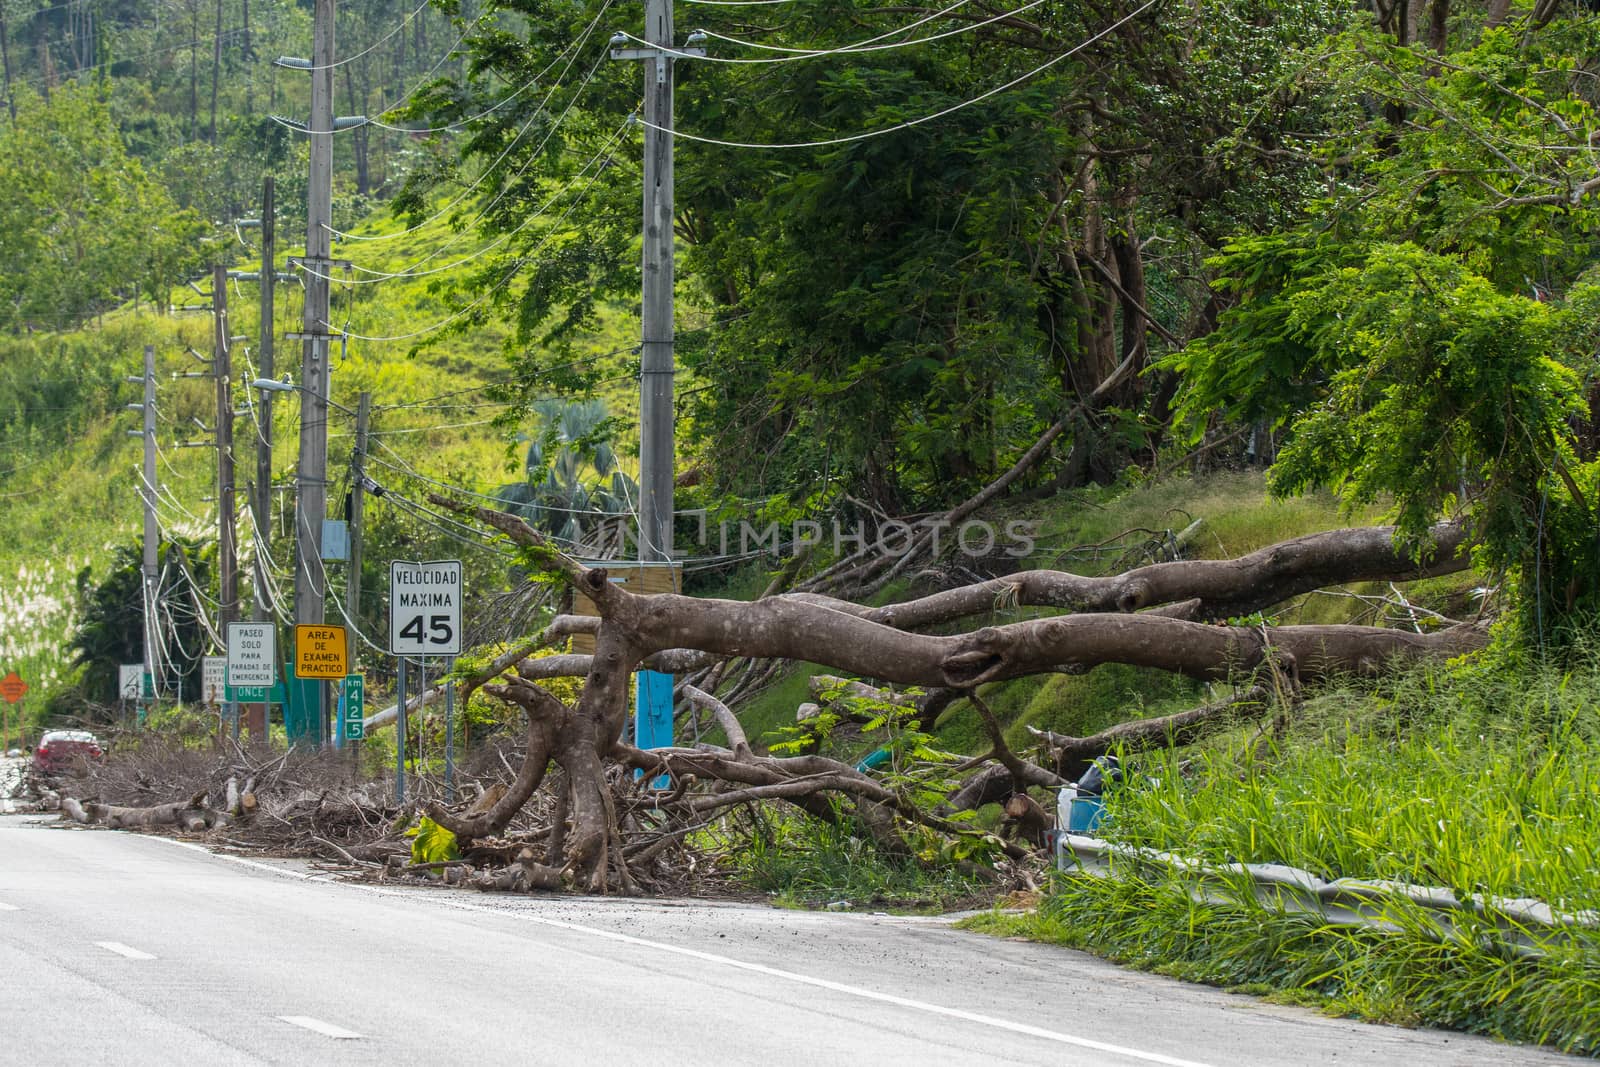 Roadside scene in Puerto Rico after Hurricane Marie showing damage to landscape